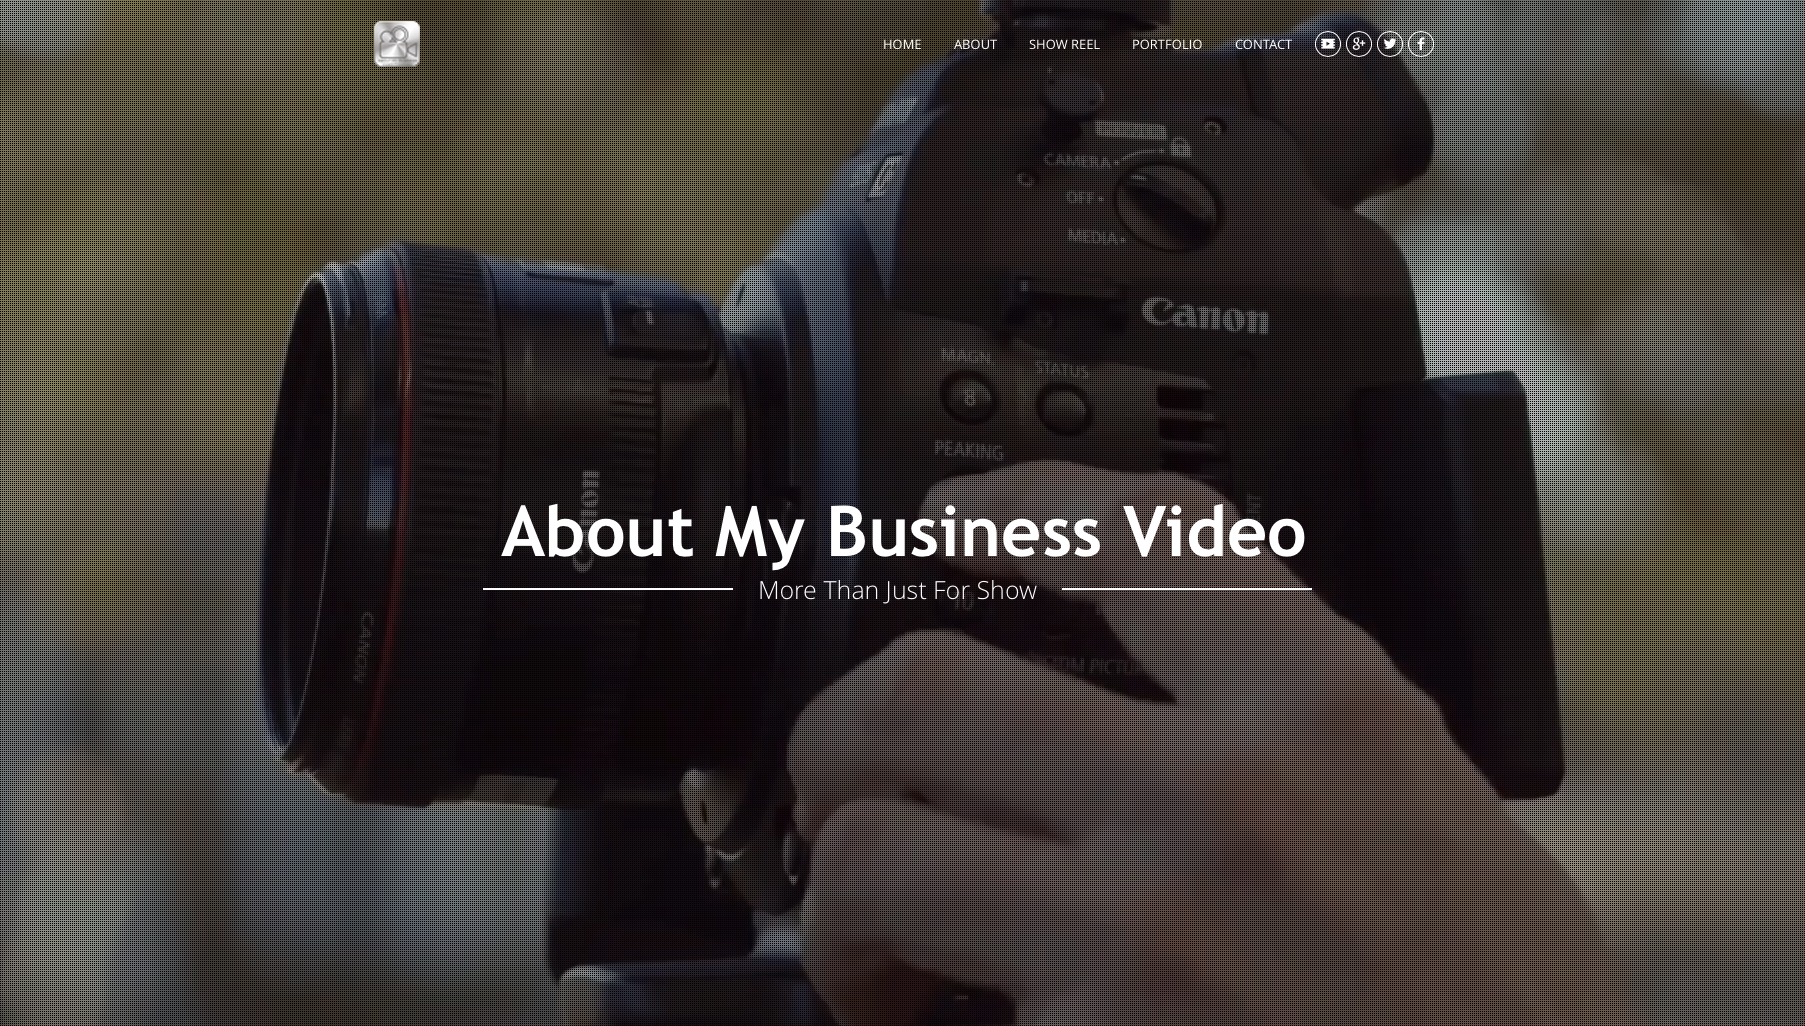 About My Business Video Company